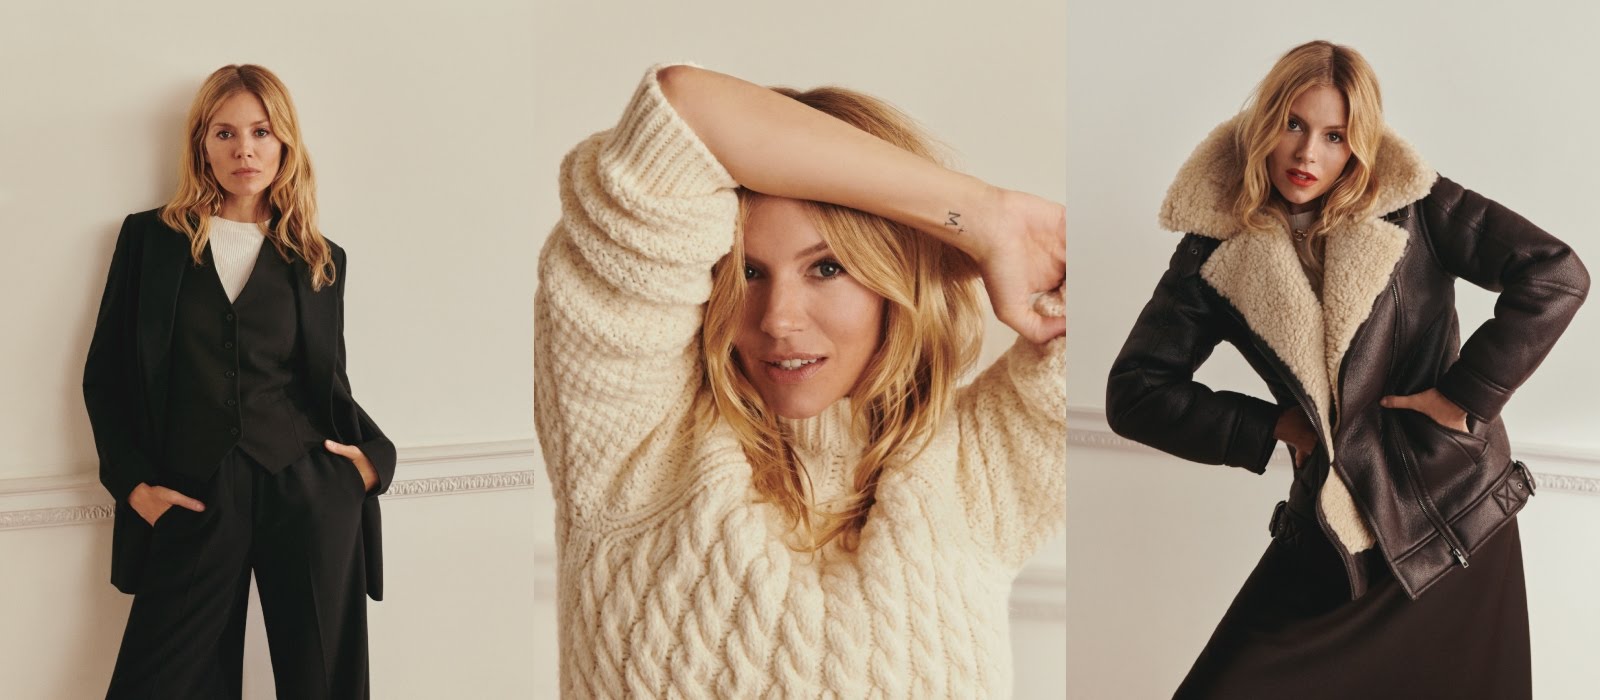 Sienna Miller's M&S collection is capsule wardrobe perfection